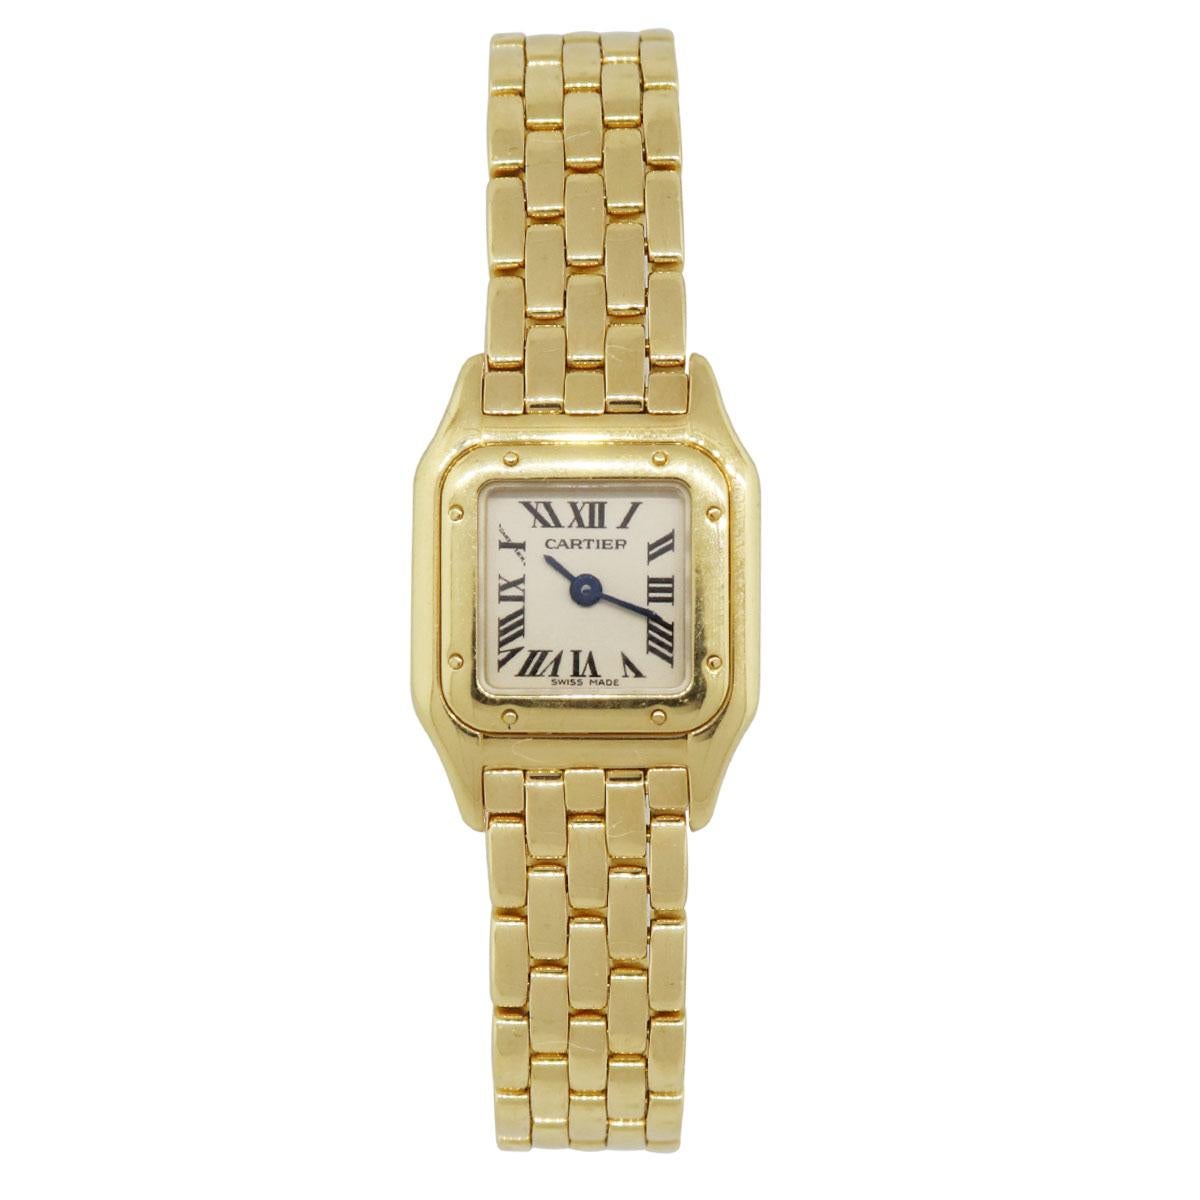 Brand: Cartier
MPN: 1130
Model: Mini Panthère
Case Material: 18k yellow gold
Case Diameter: 17mm
Crystal: Sapphire crystal
Bezel: 18k yellow gold smooth bezel
Dial: White roman dial
Bracelet: 18k yellow gold
Size: Will fit up to a 5.50″”